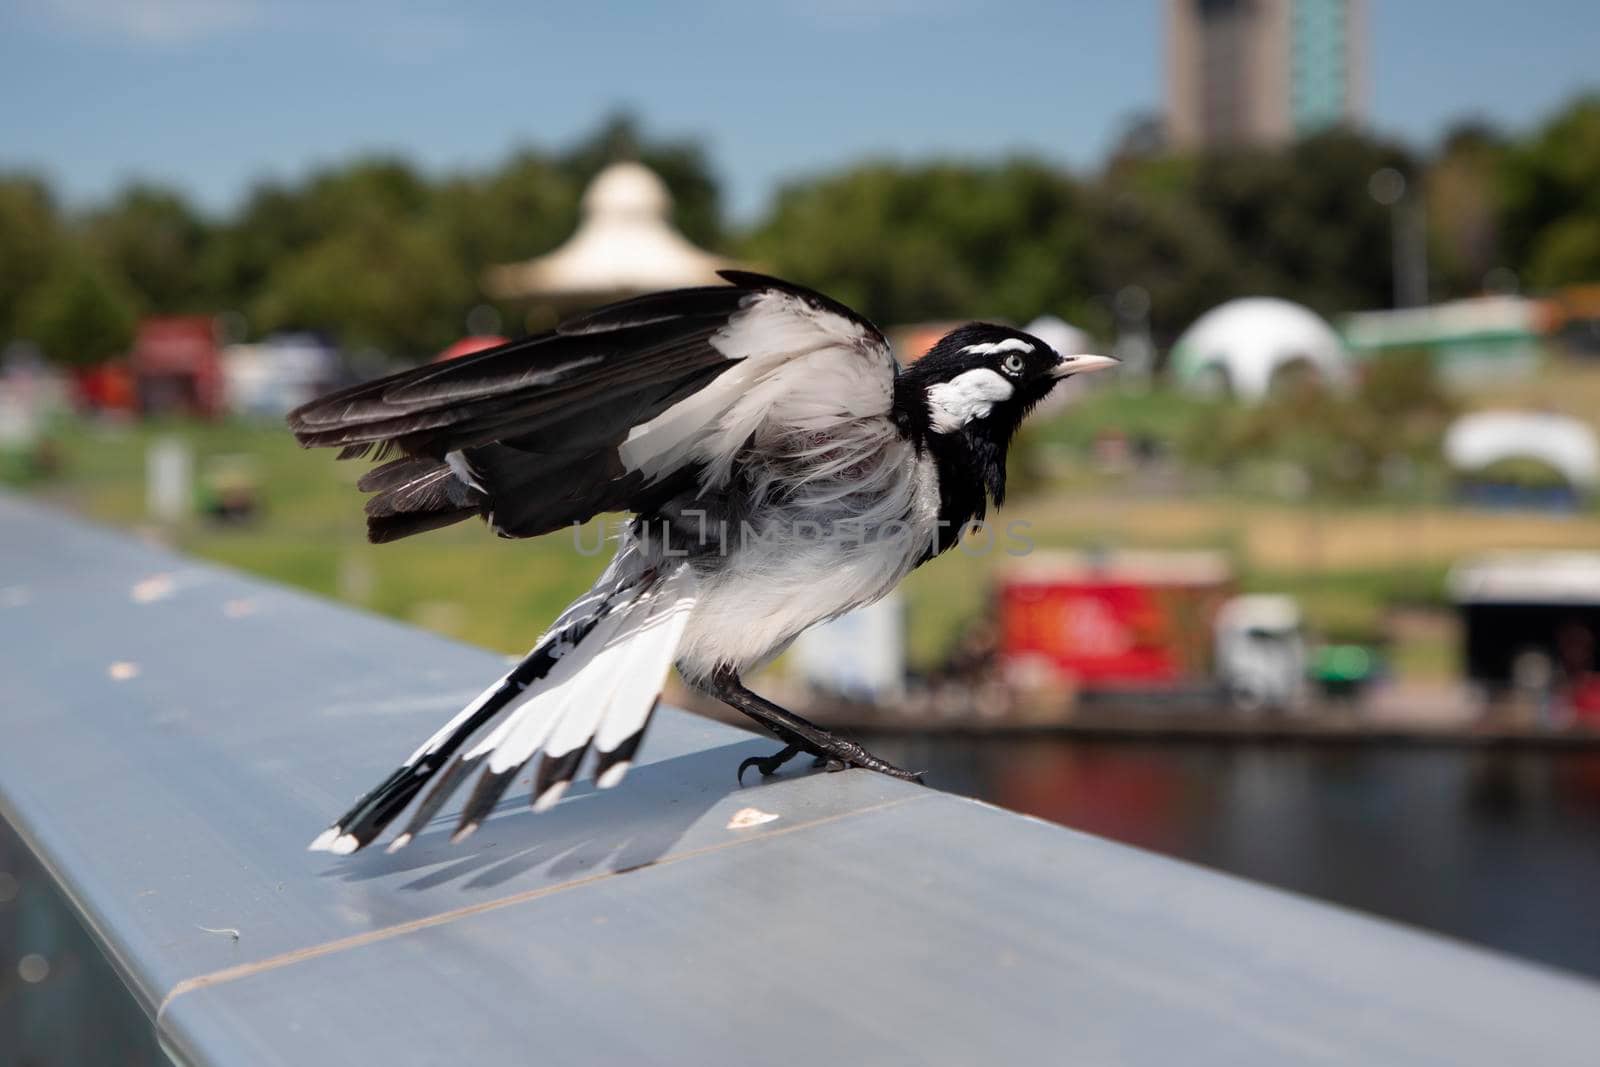 A black and white magpie bird sitting on an aluminium hand rail in the sunshine